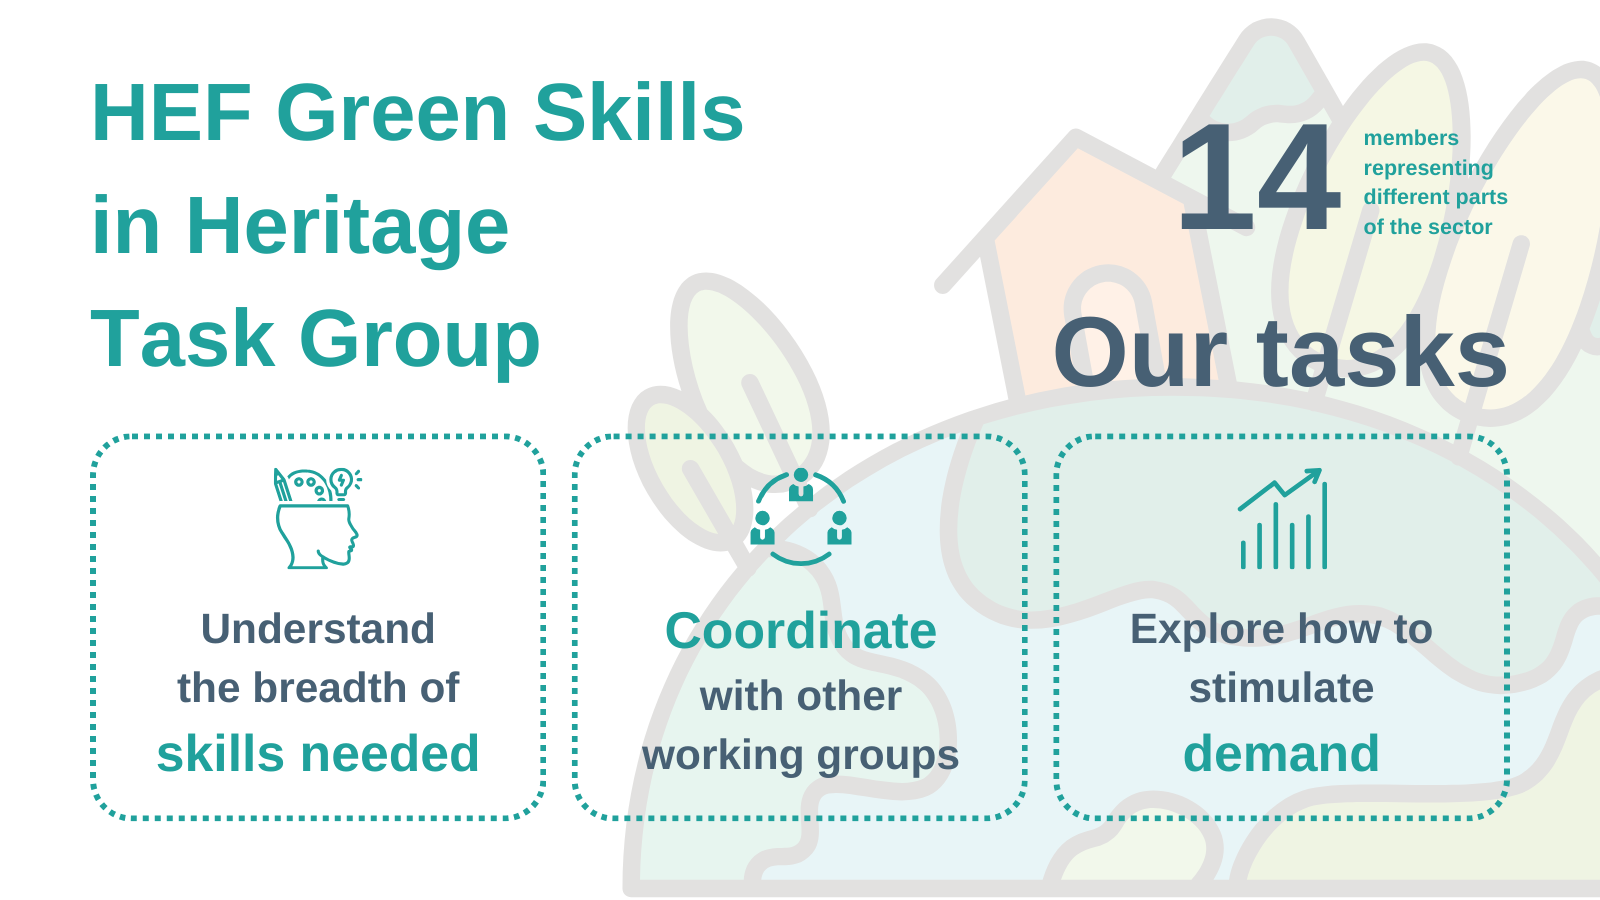 HEF Green Skills in Heritage Task Group: our tasks - understand the breadth of skills need, coordinate with other working groups, explore how to stimulate demand. 14 members representing different parts of the sector